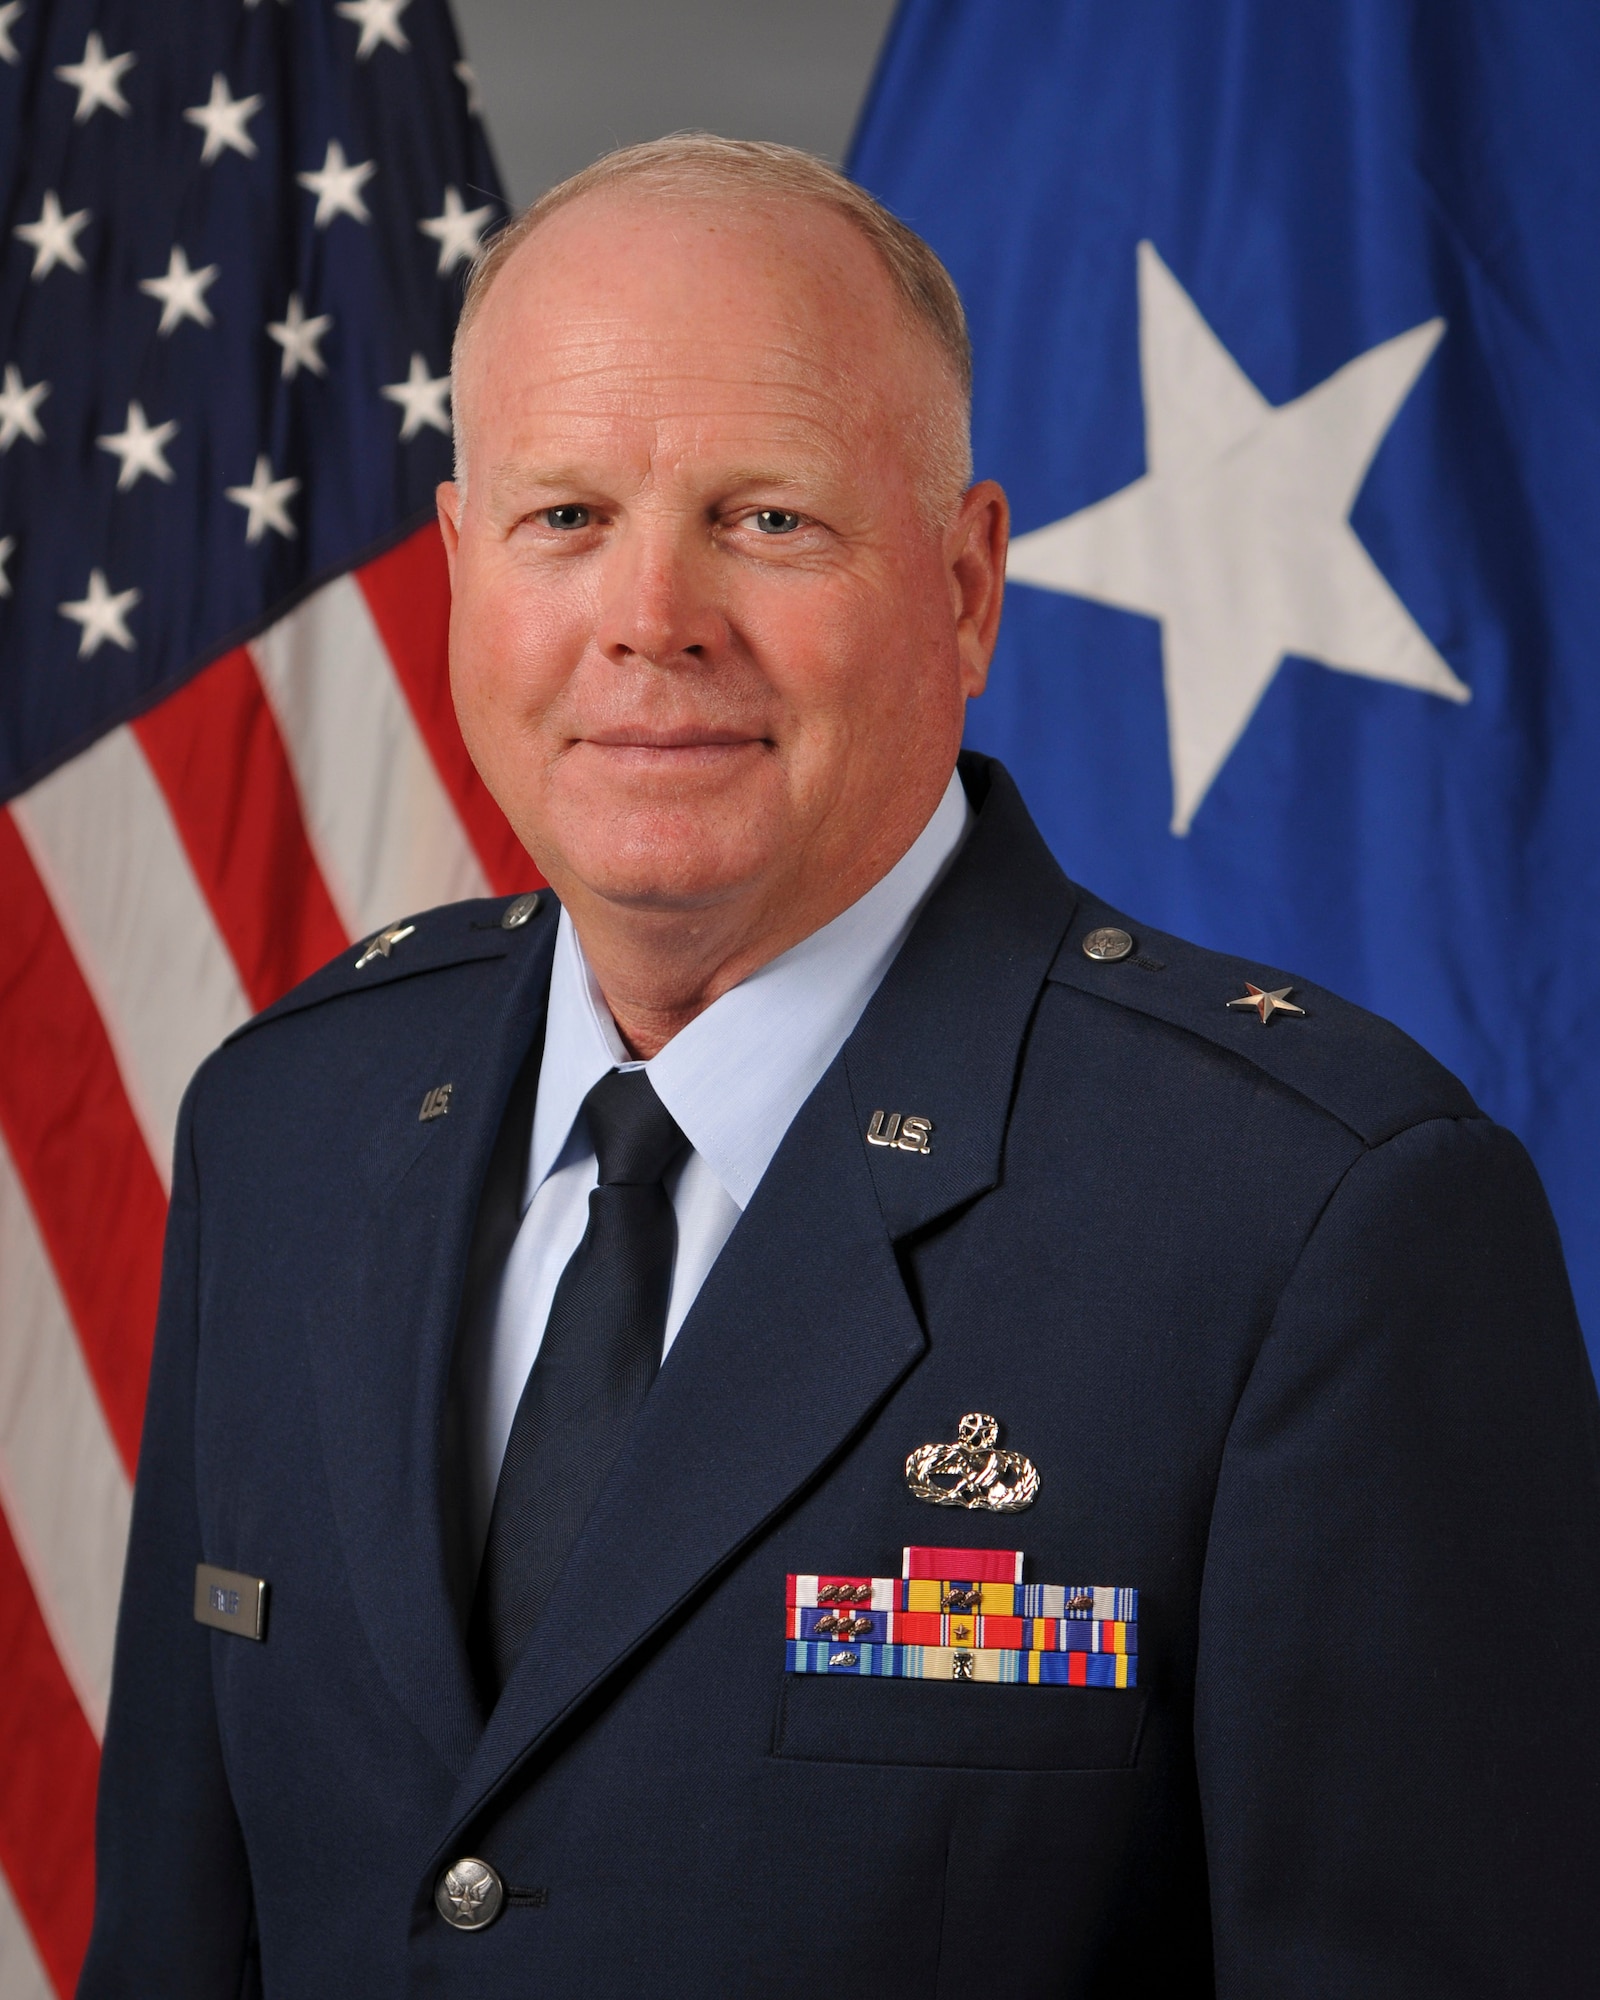 An Air Force general in uniform against a background of flags